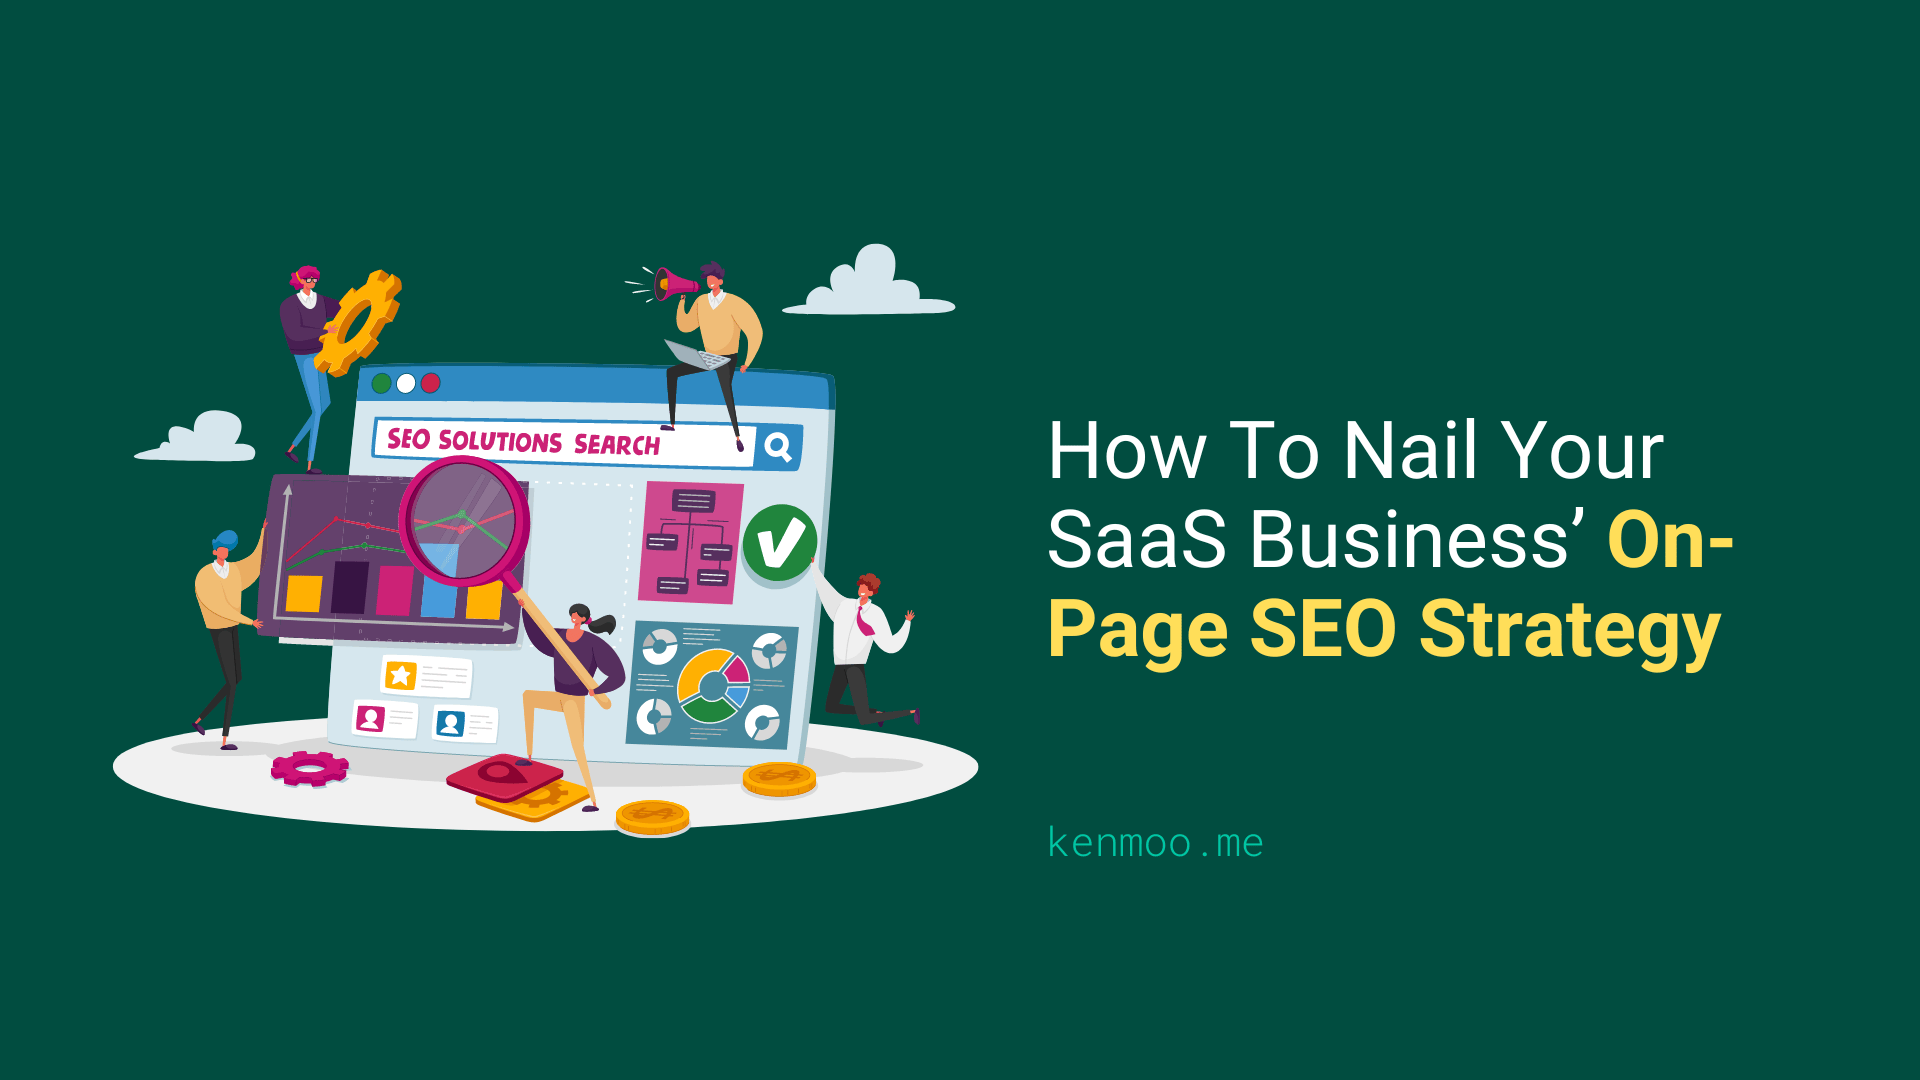 How To Nail Your SaaS Business’ On-Page SEO Strategy